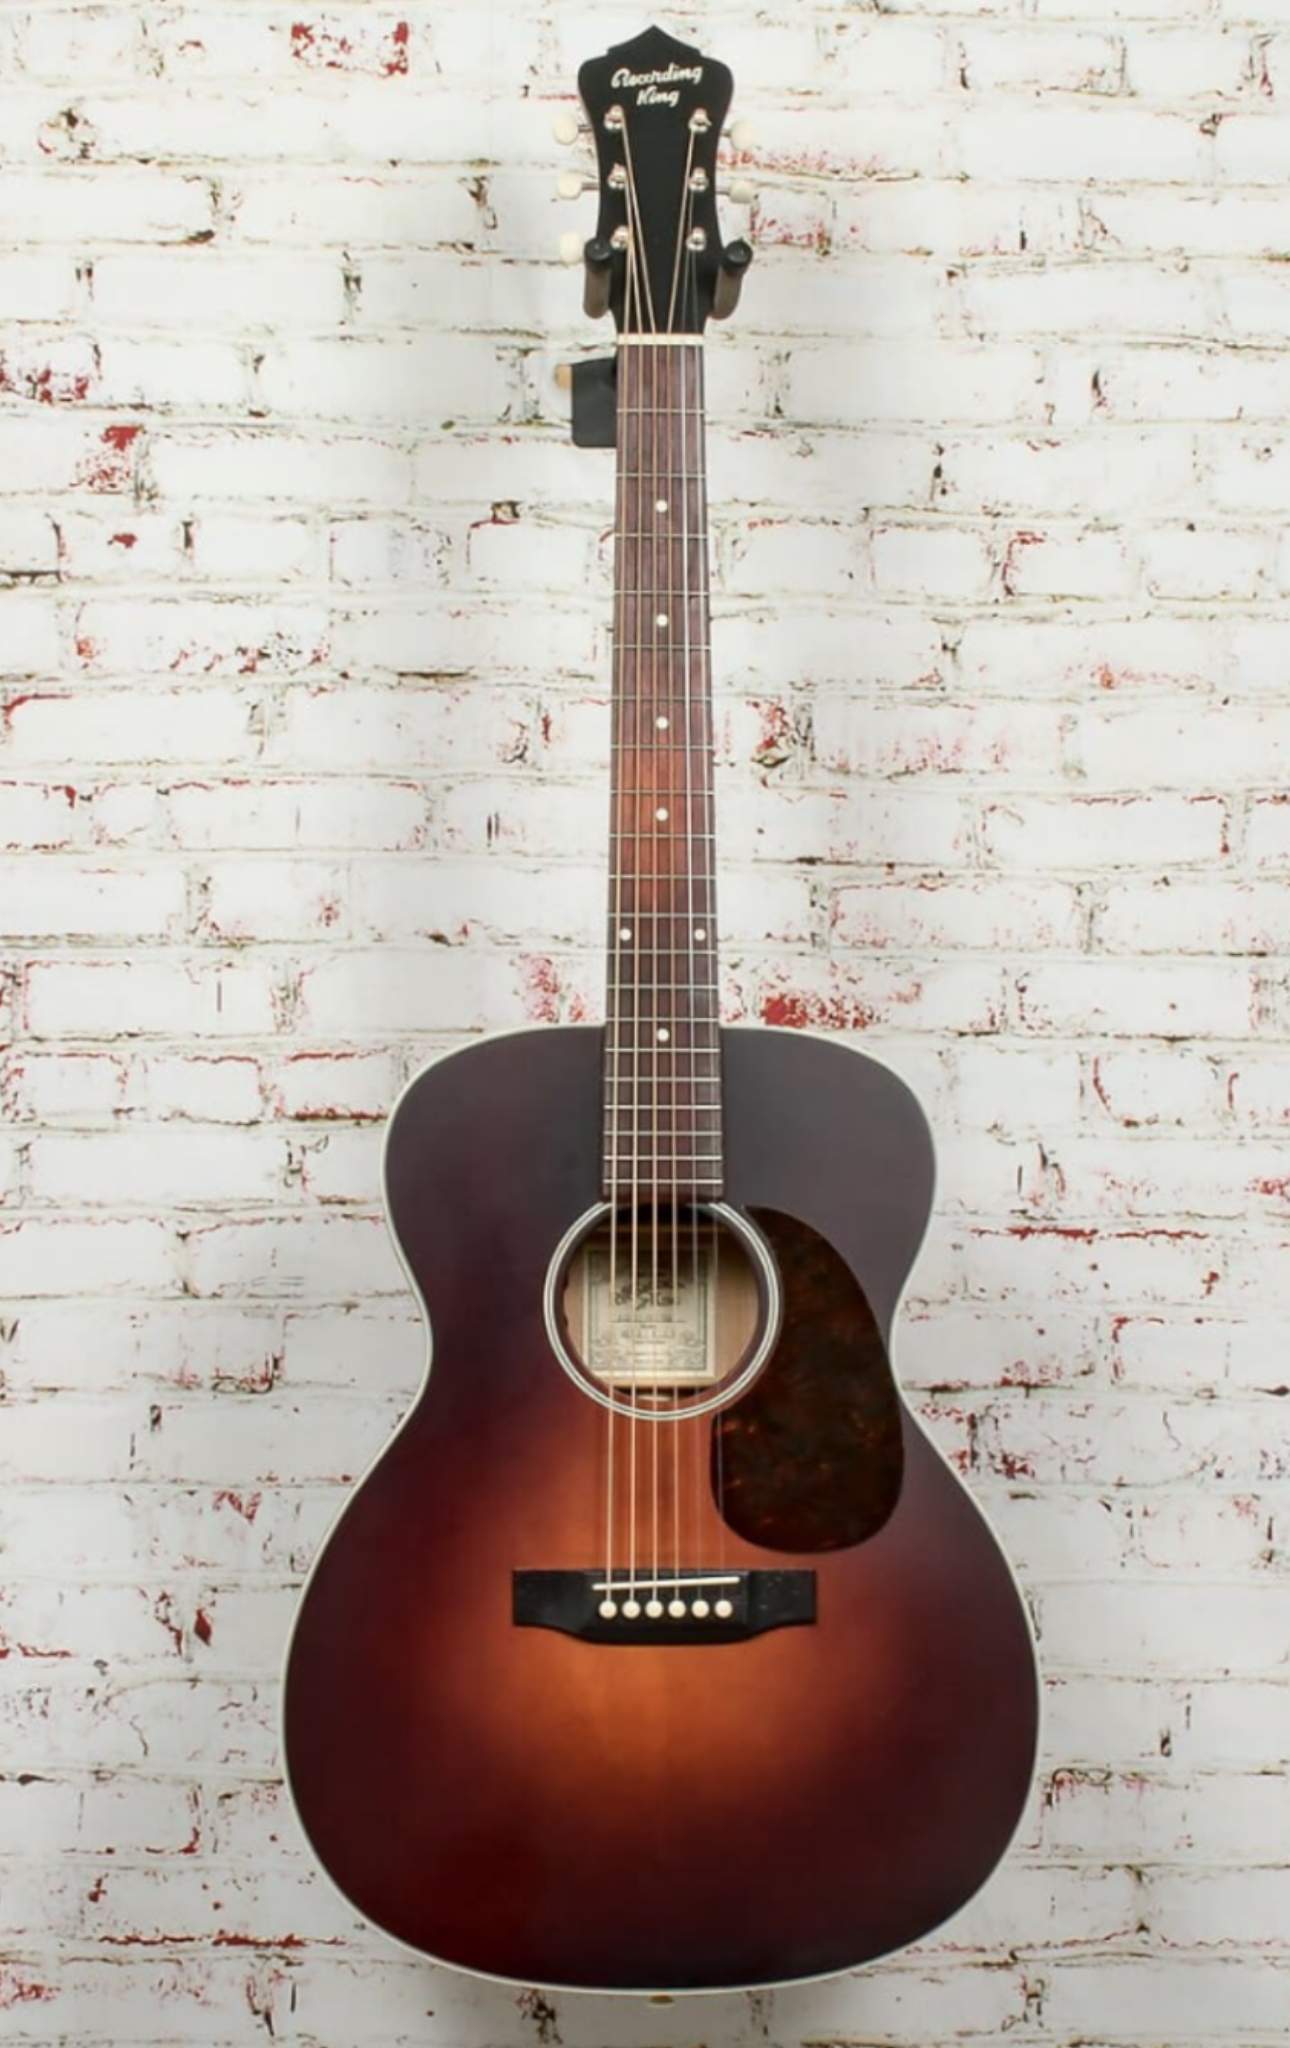 Retail therapy...bought a Martin 000-screenshot_20210124-214309-png